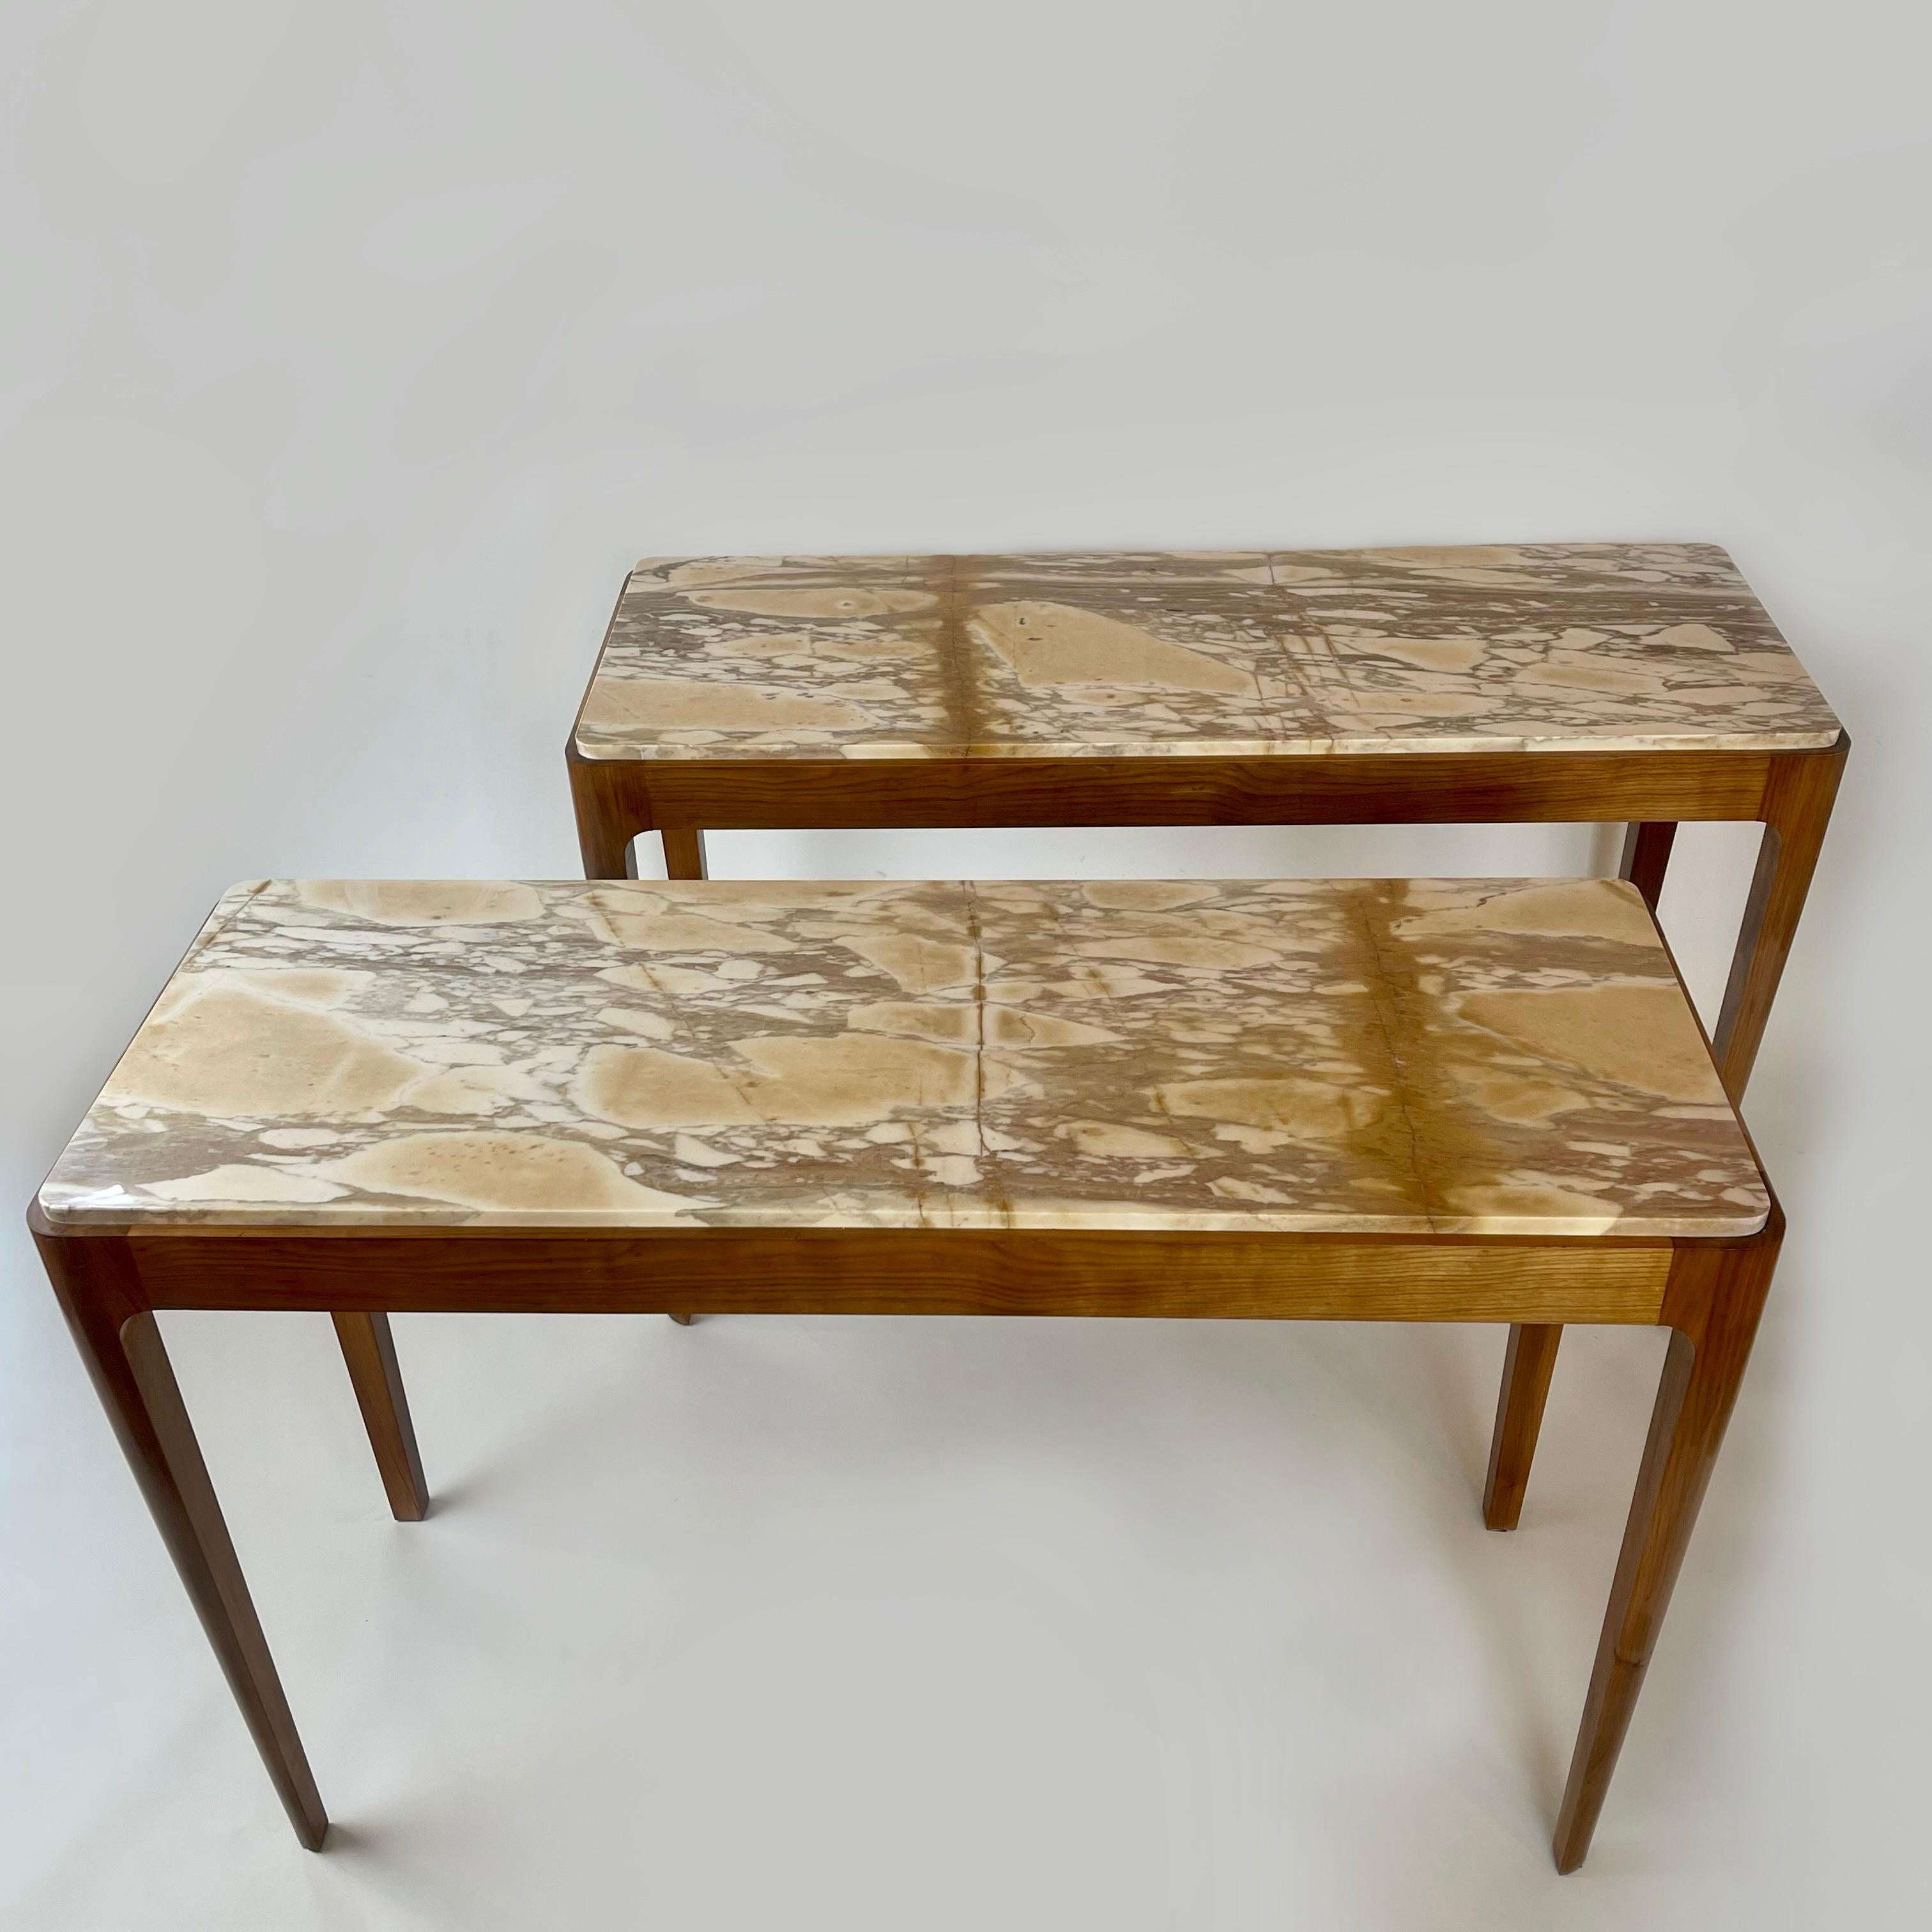 The cherry wood consoles are spirit-finished. 
Extremely elegant and very rare Broccatello Siena Marble on top of each one.
These yellow stones are stained with hazelnut, light brown and ivory colors.